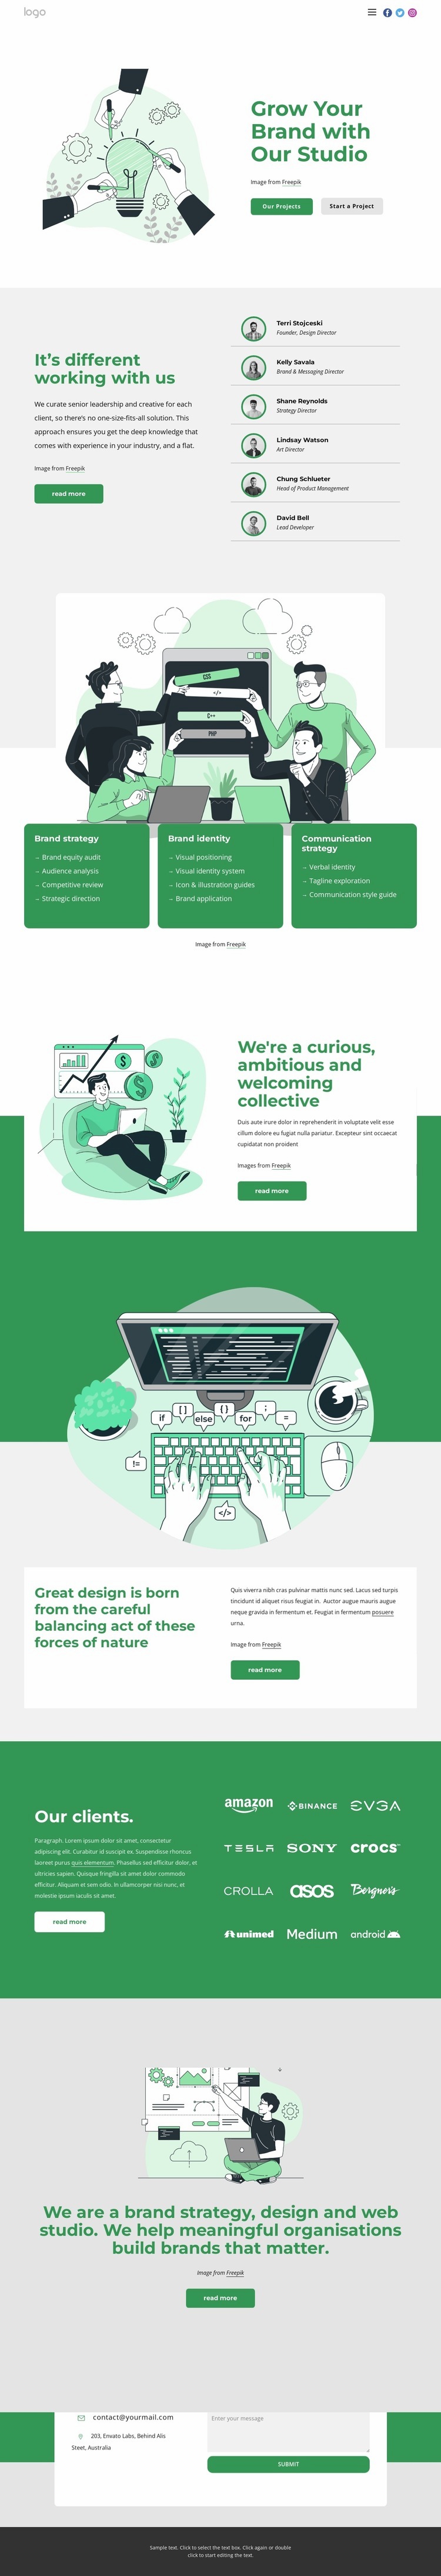 Grow your brand with our studio Wix Template Alternative